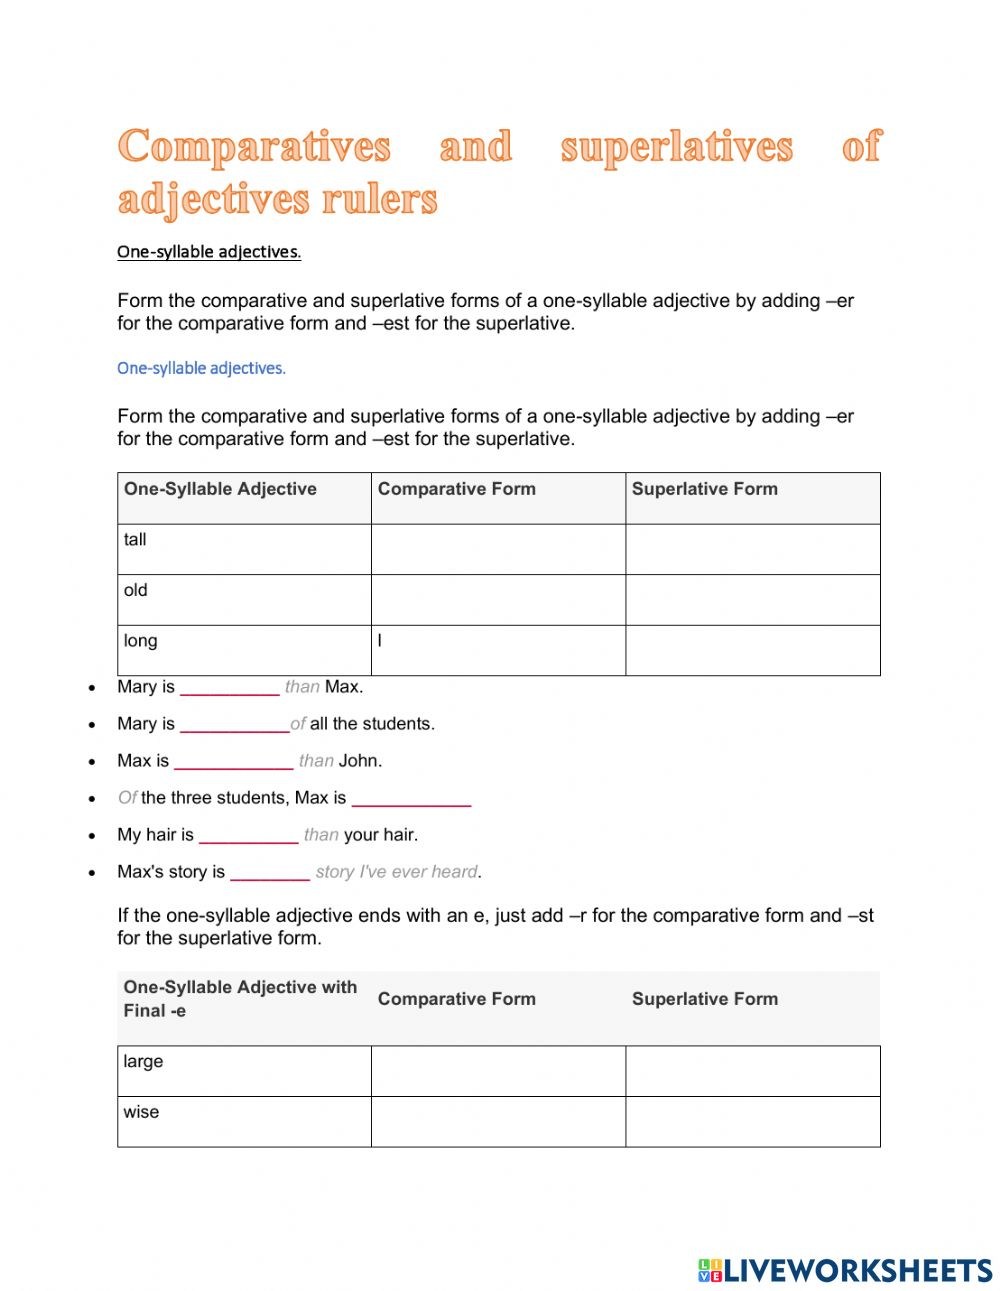 6a-1-demonstrative-adjectives-worksheet-answers-adjectiveworksheets